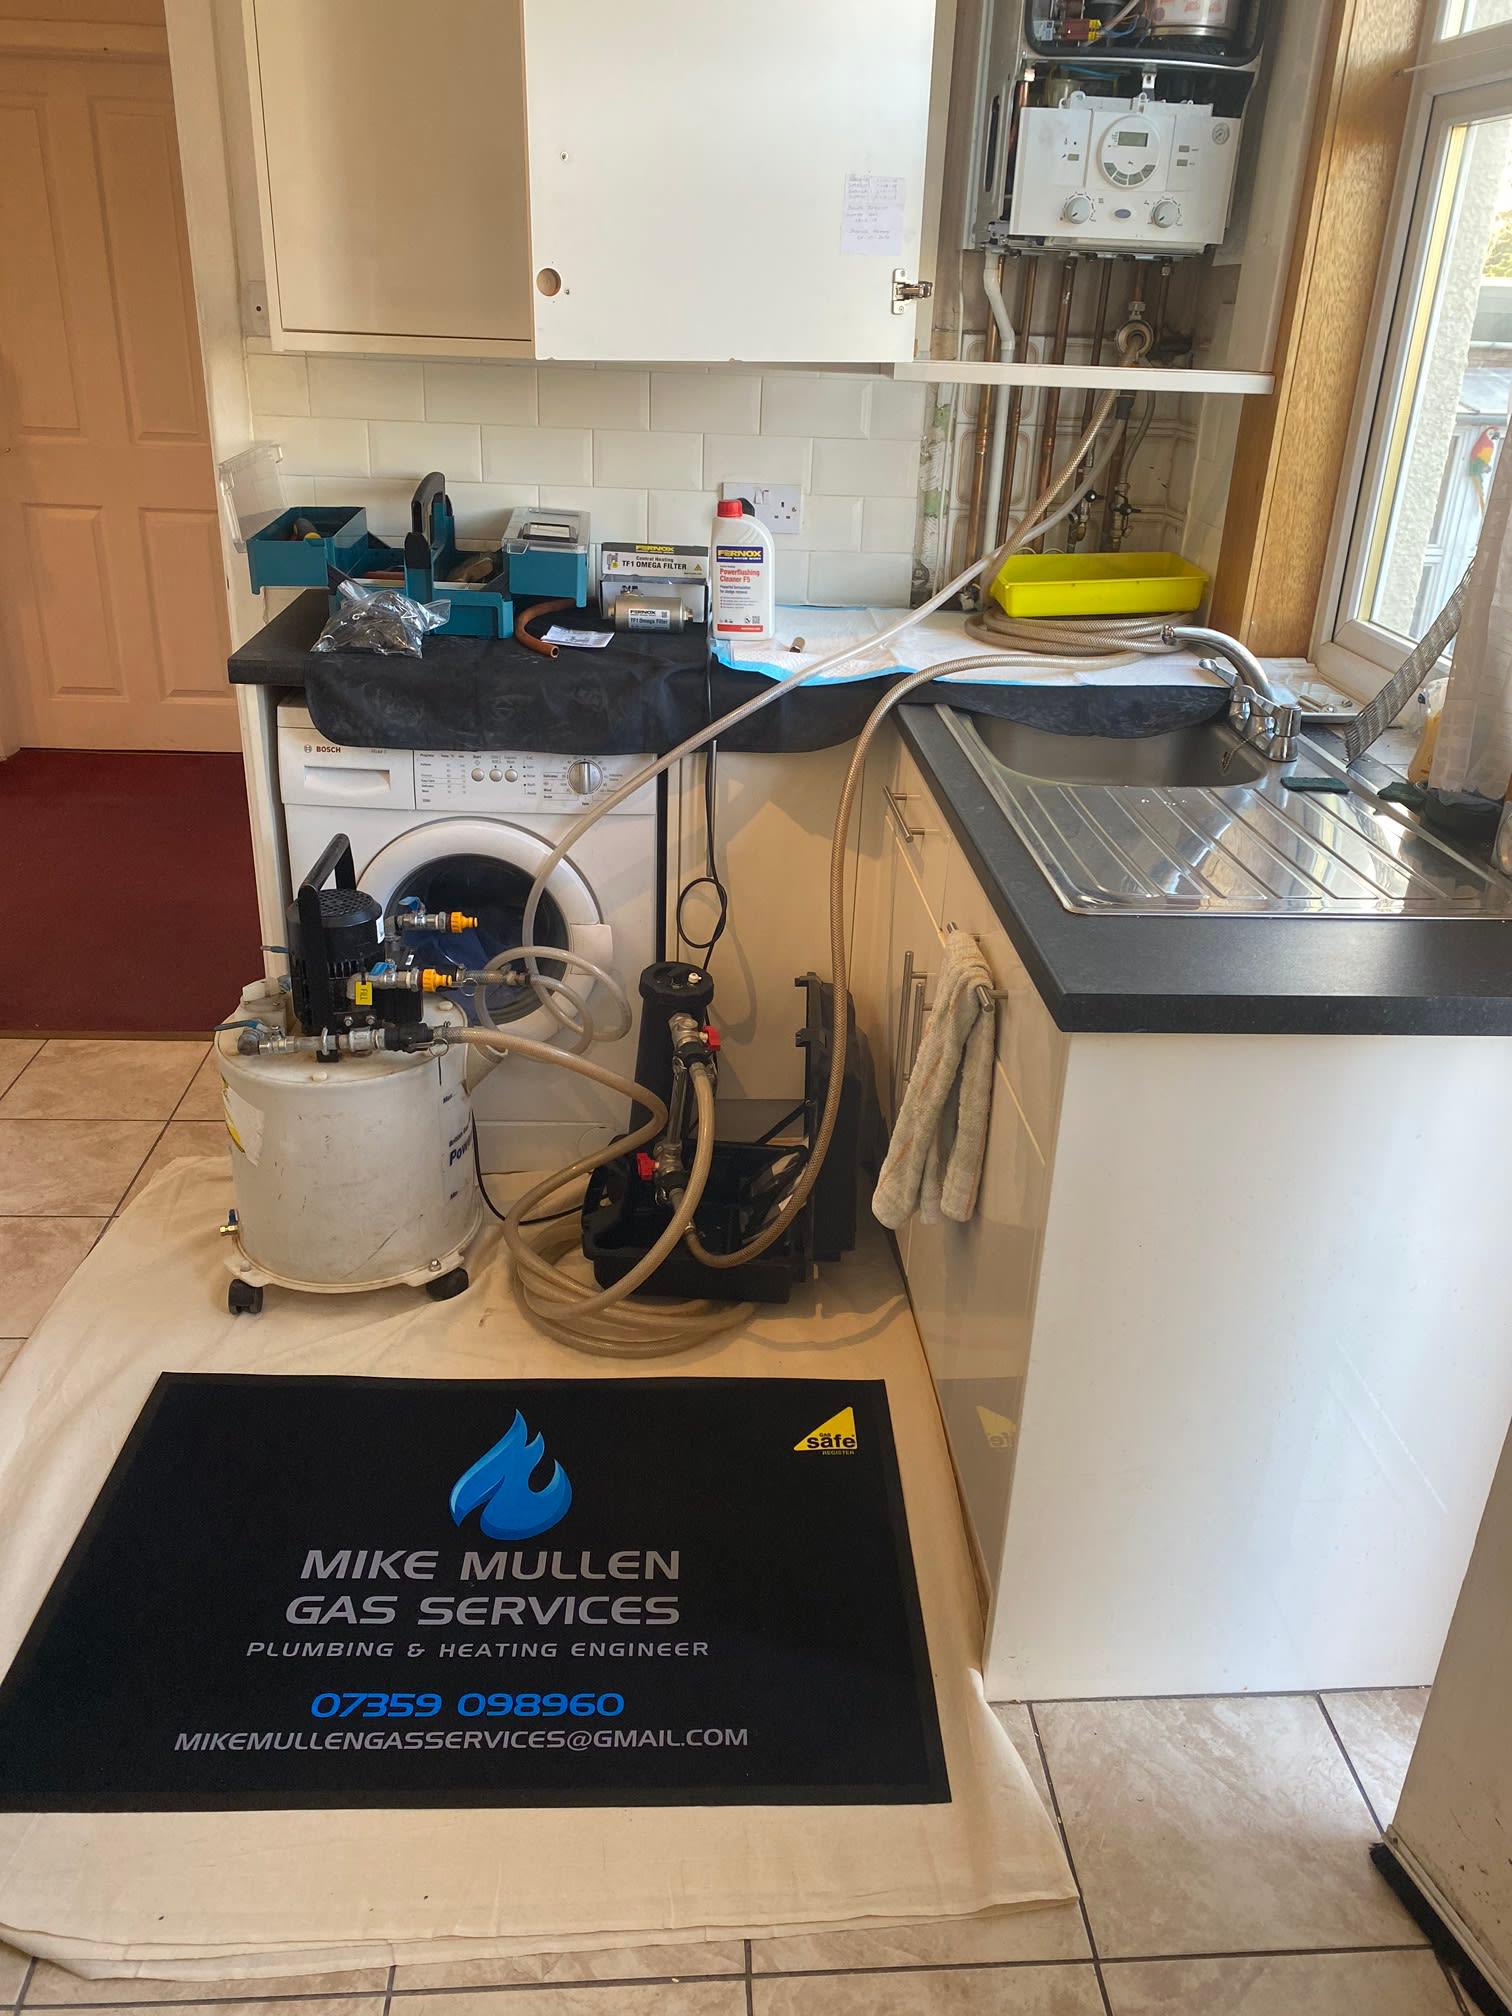 Images Mike Mullen Gas Services